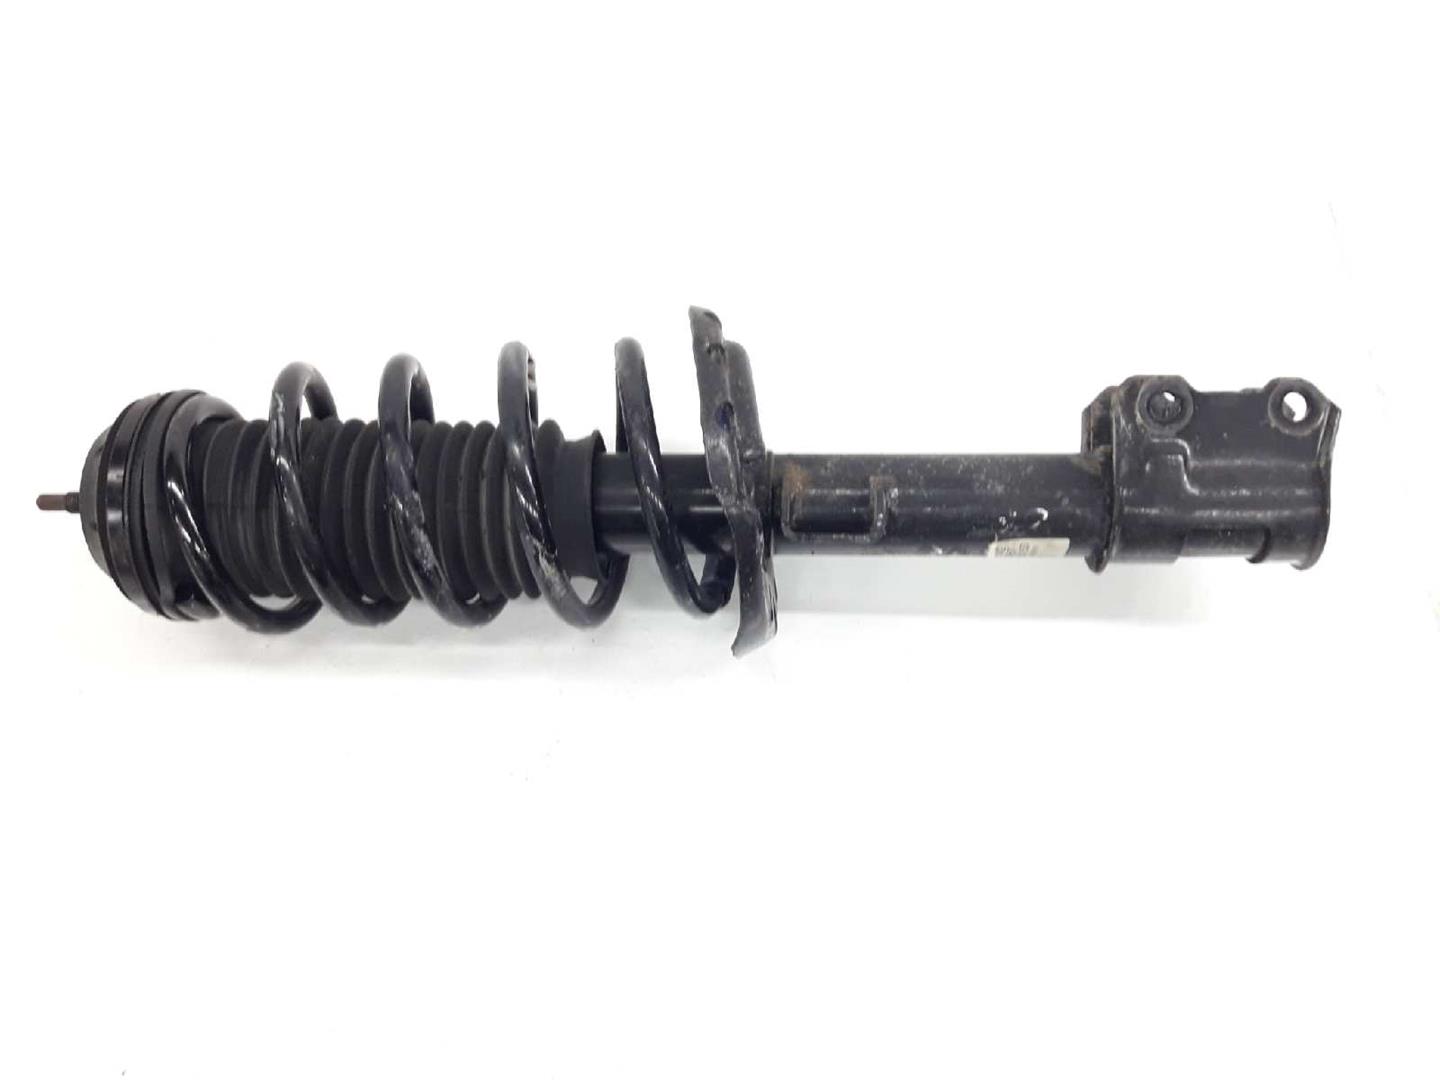 OPEL Corsa D (2006-2020) Front Right Shock Absorber 13268957, 22245142, 93168545 19643005